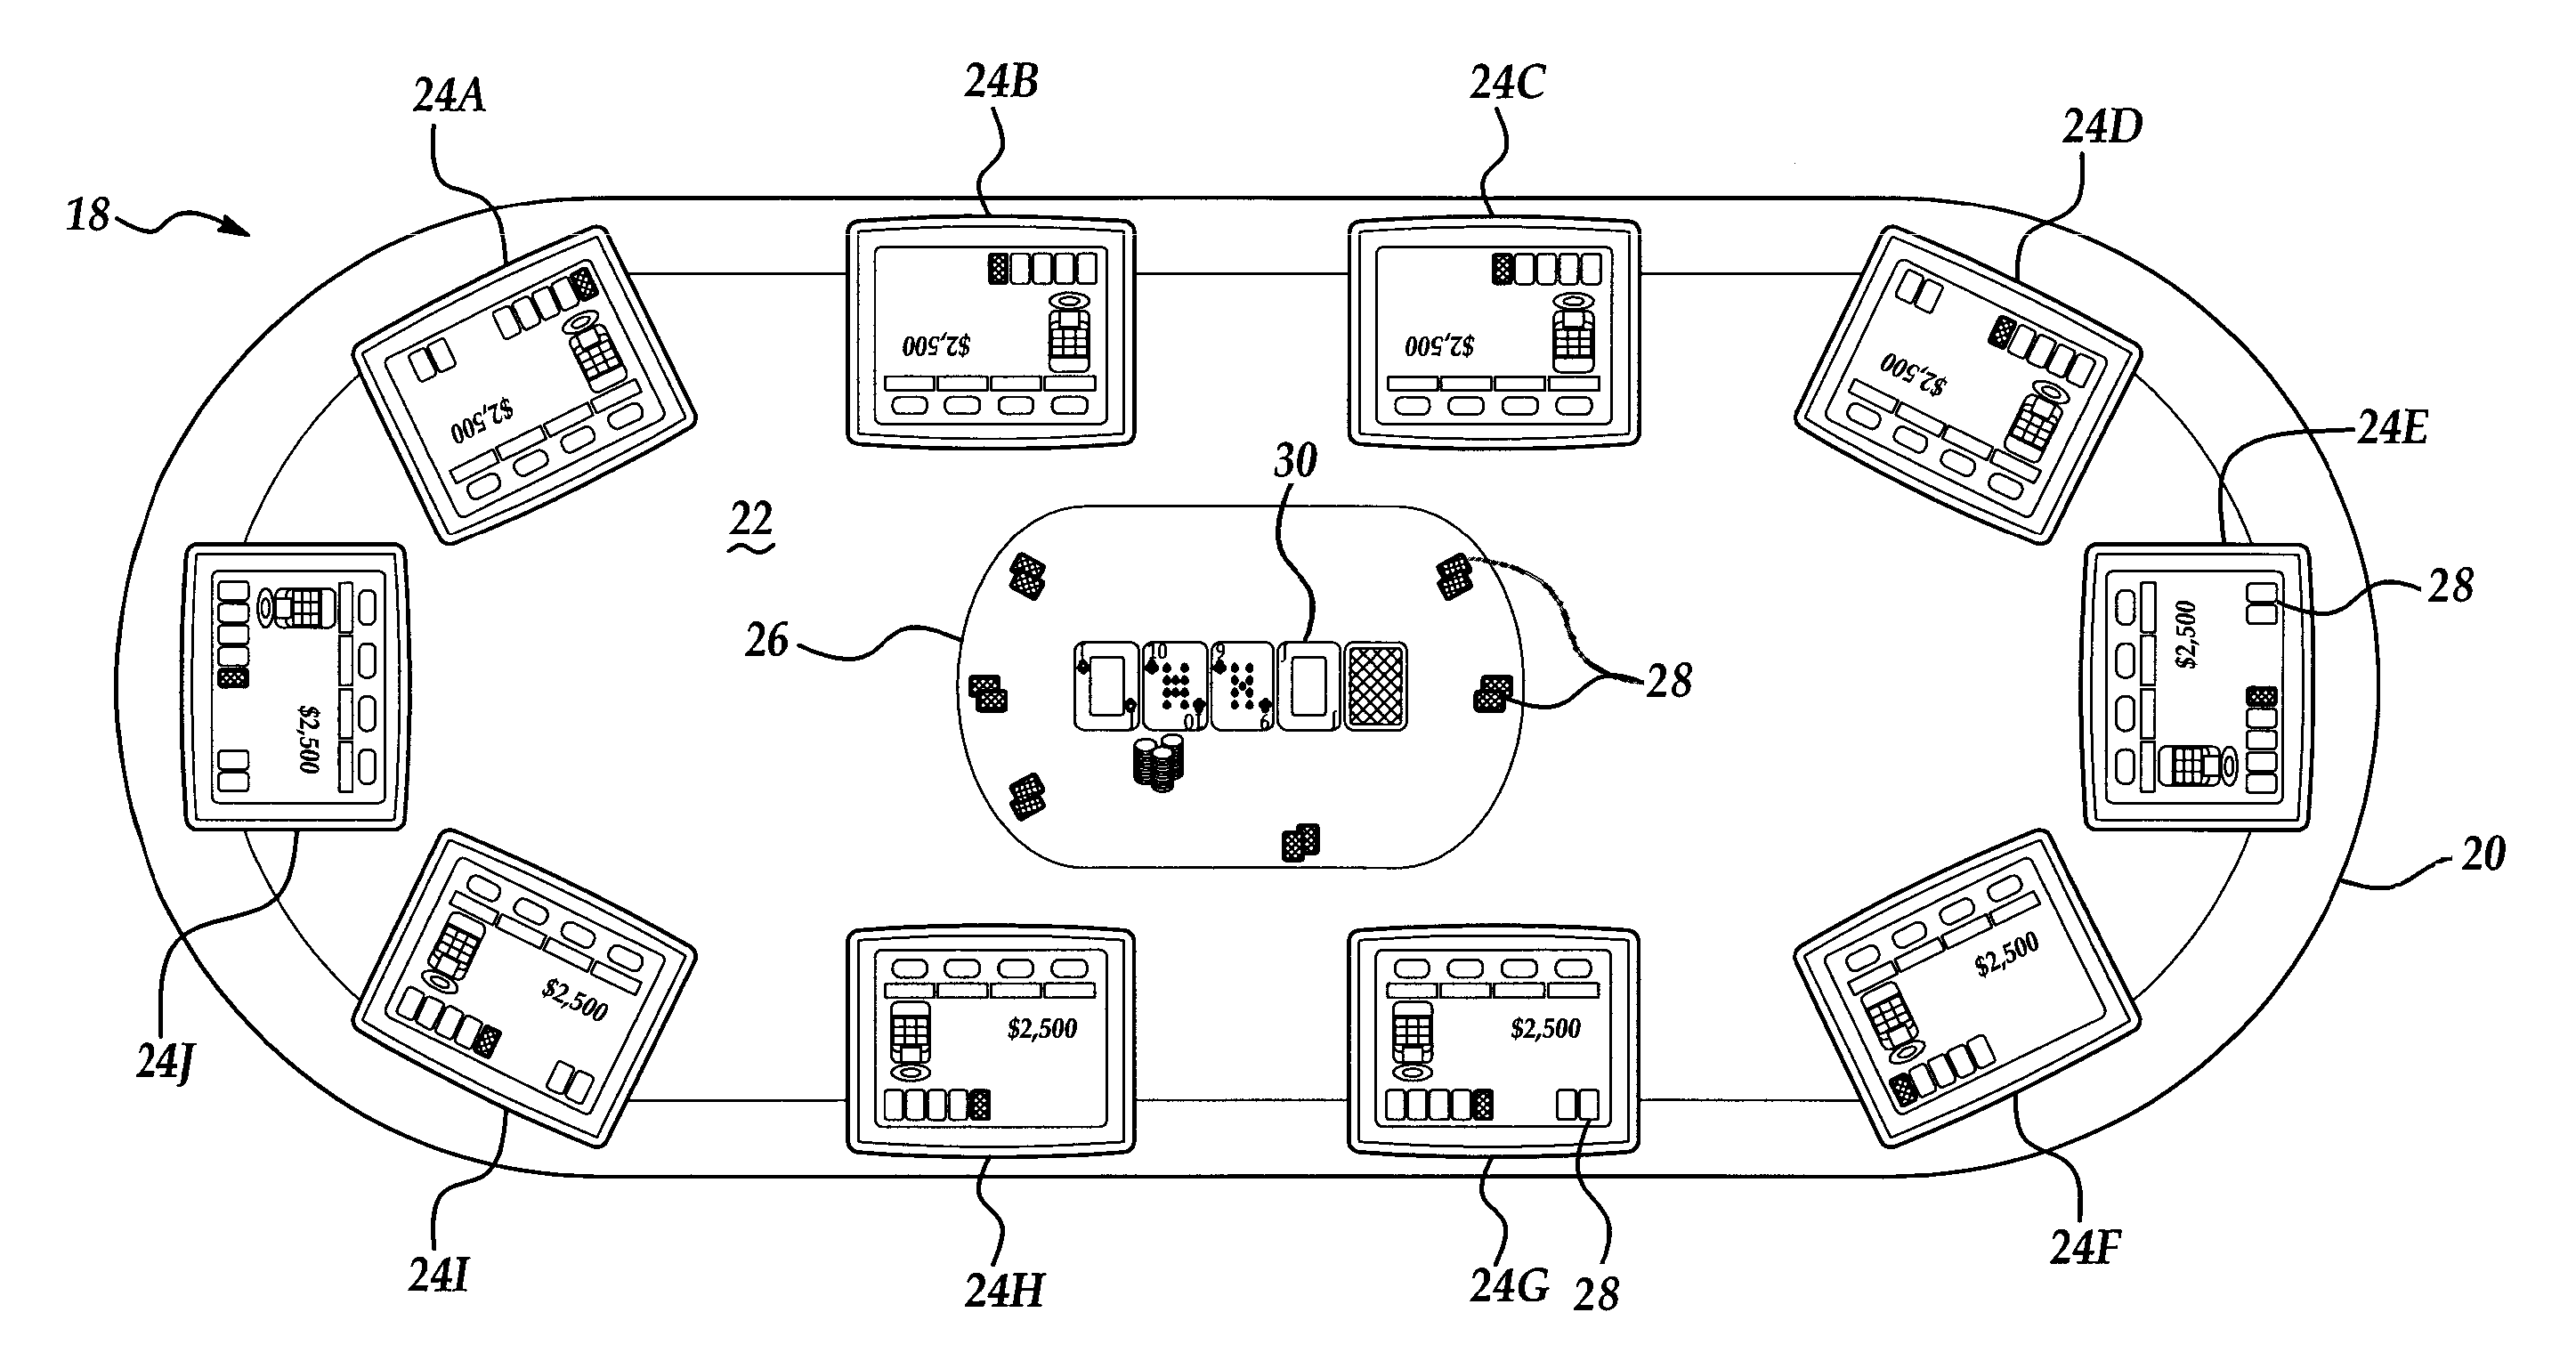 System and method for providing a host console for adjust a pot or chip stack of a player of an electronic card game